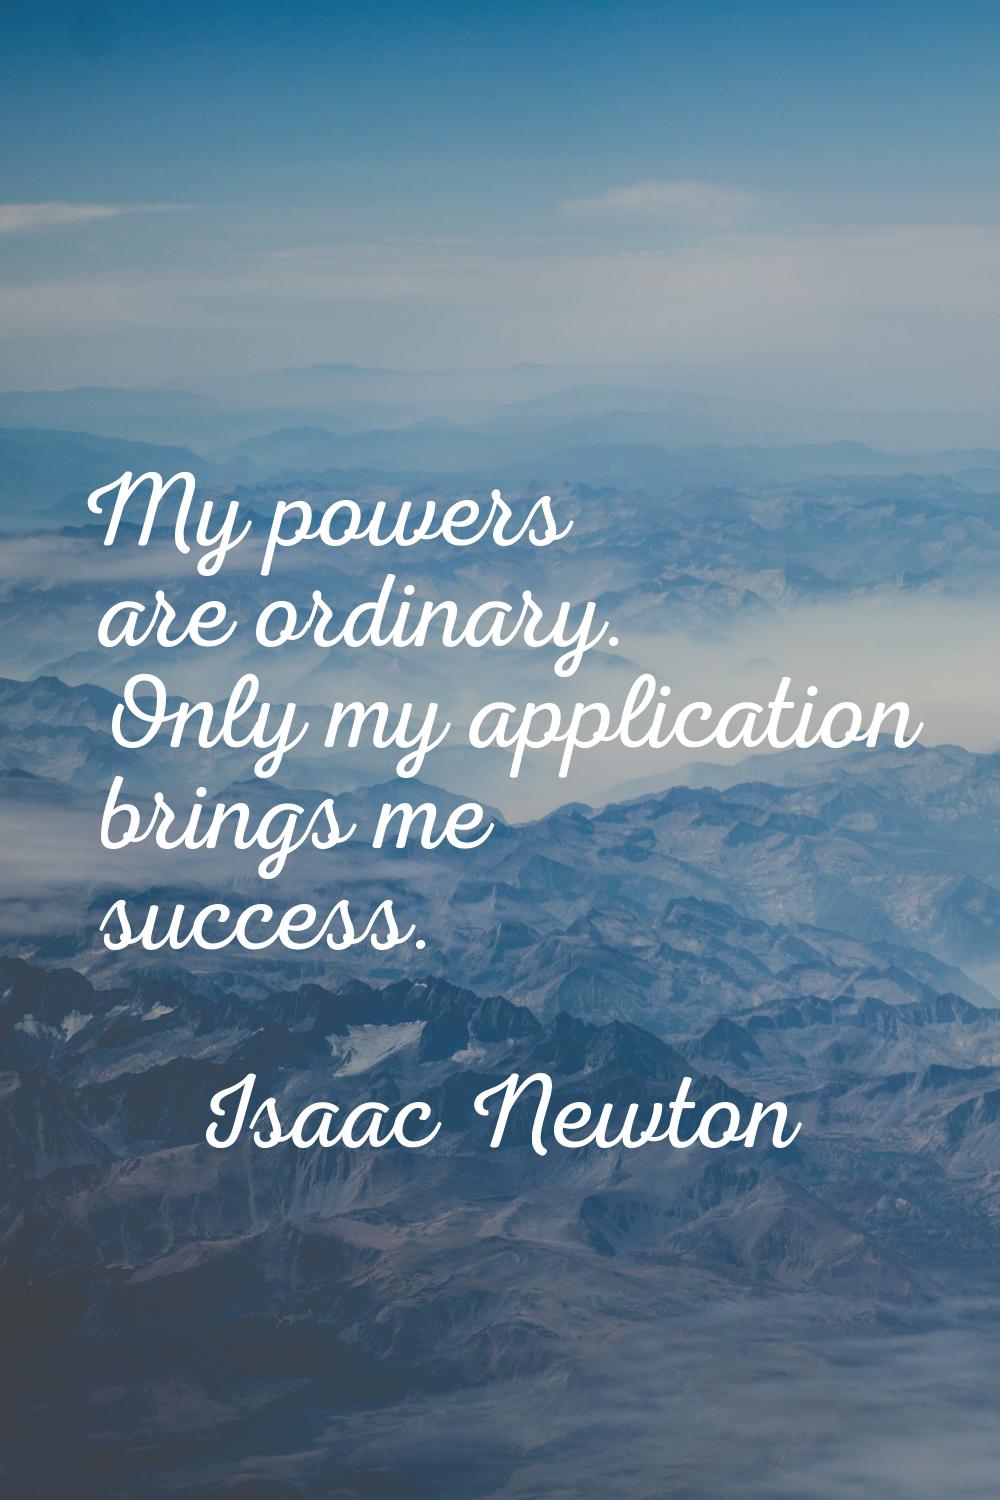 My powers are ordinary. Only my application brings me success.